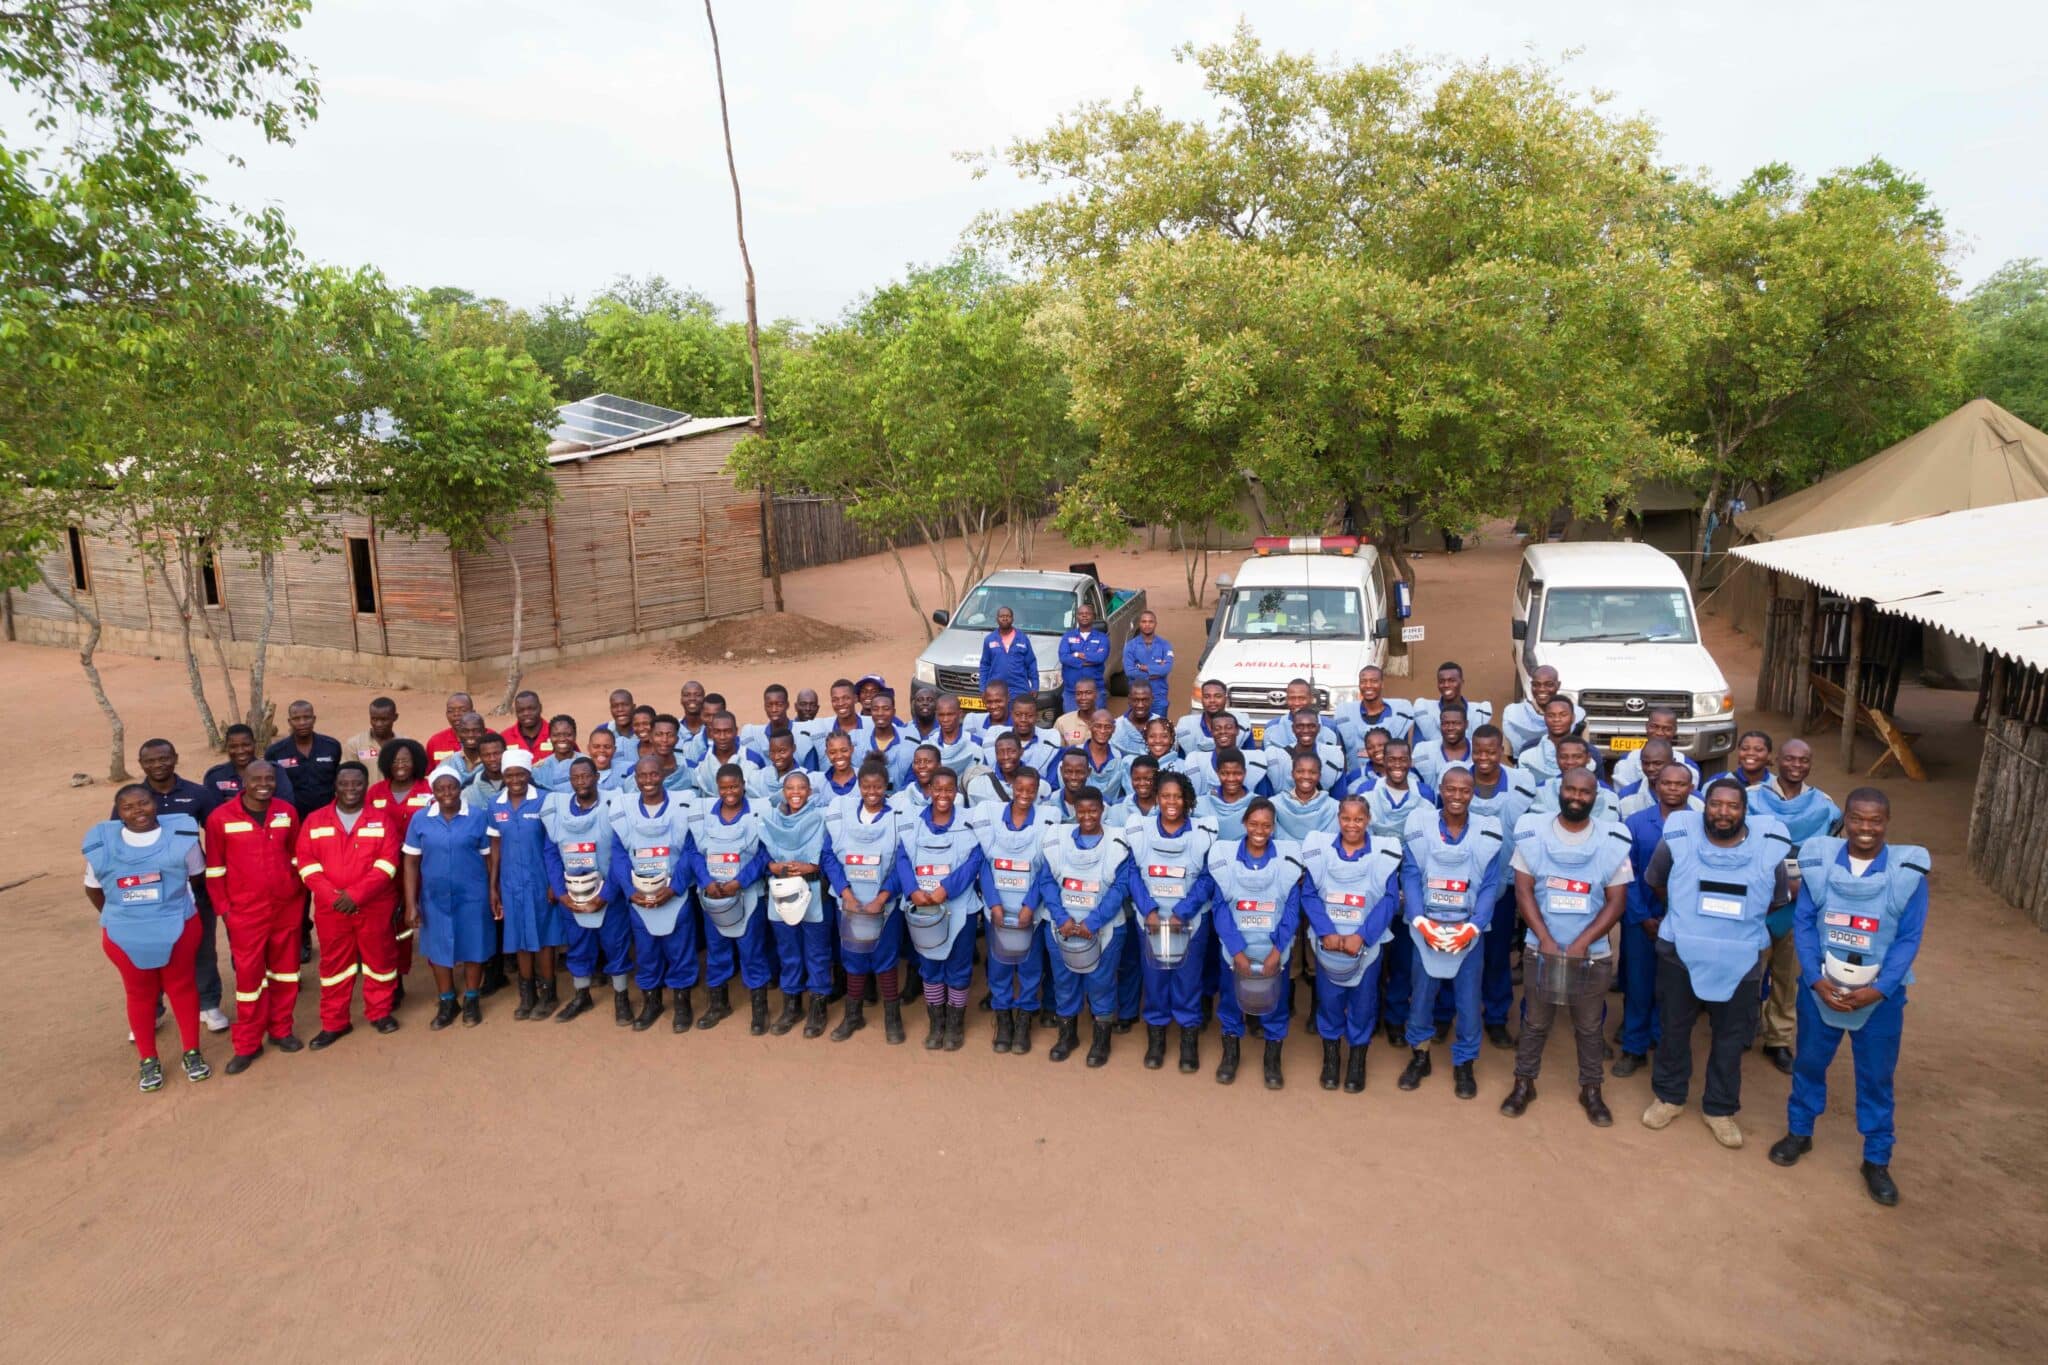 APOPO Advances Mine Clearance in Zimbabwe, Boosting Safety and Economic Development